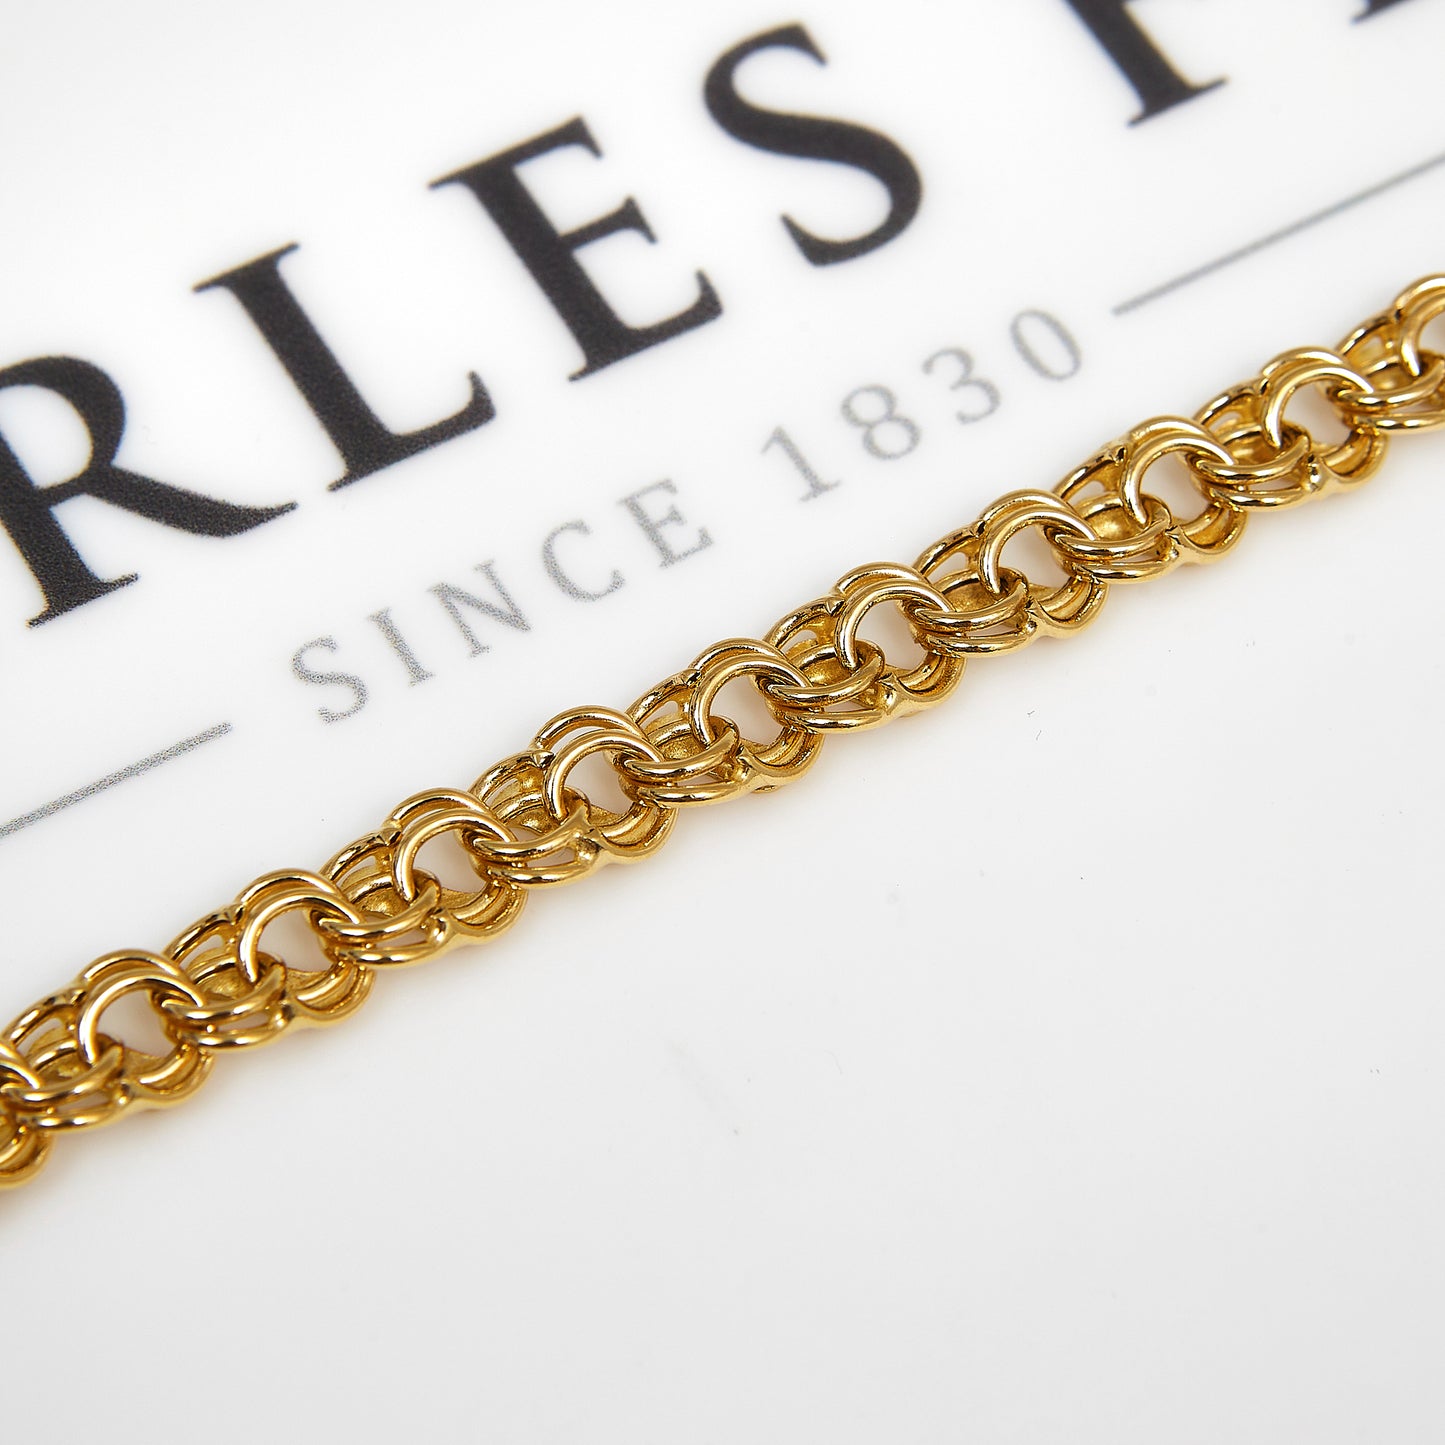 Pre-Owned 18ct Yellow Gold Figure-Of-Eight Link Bracelet